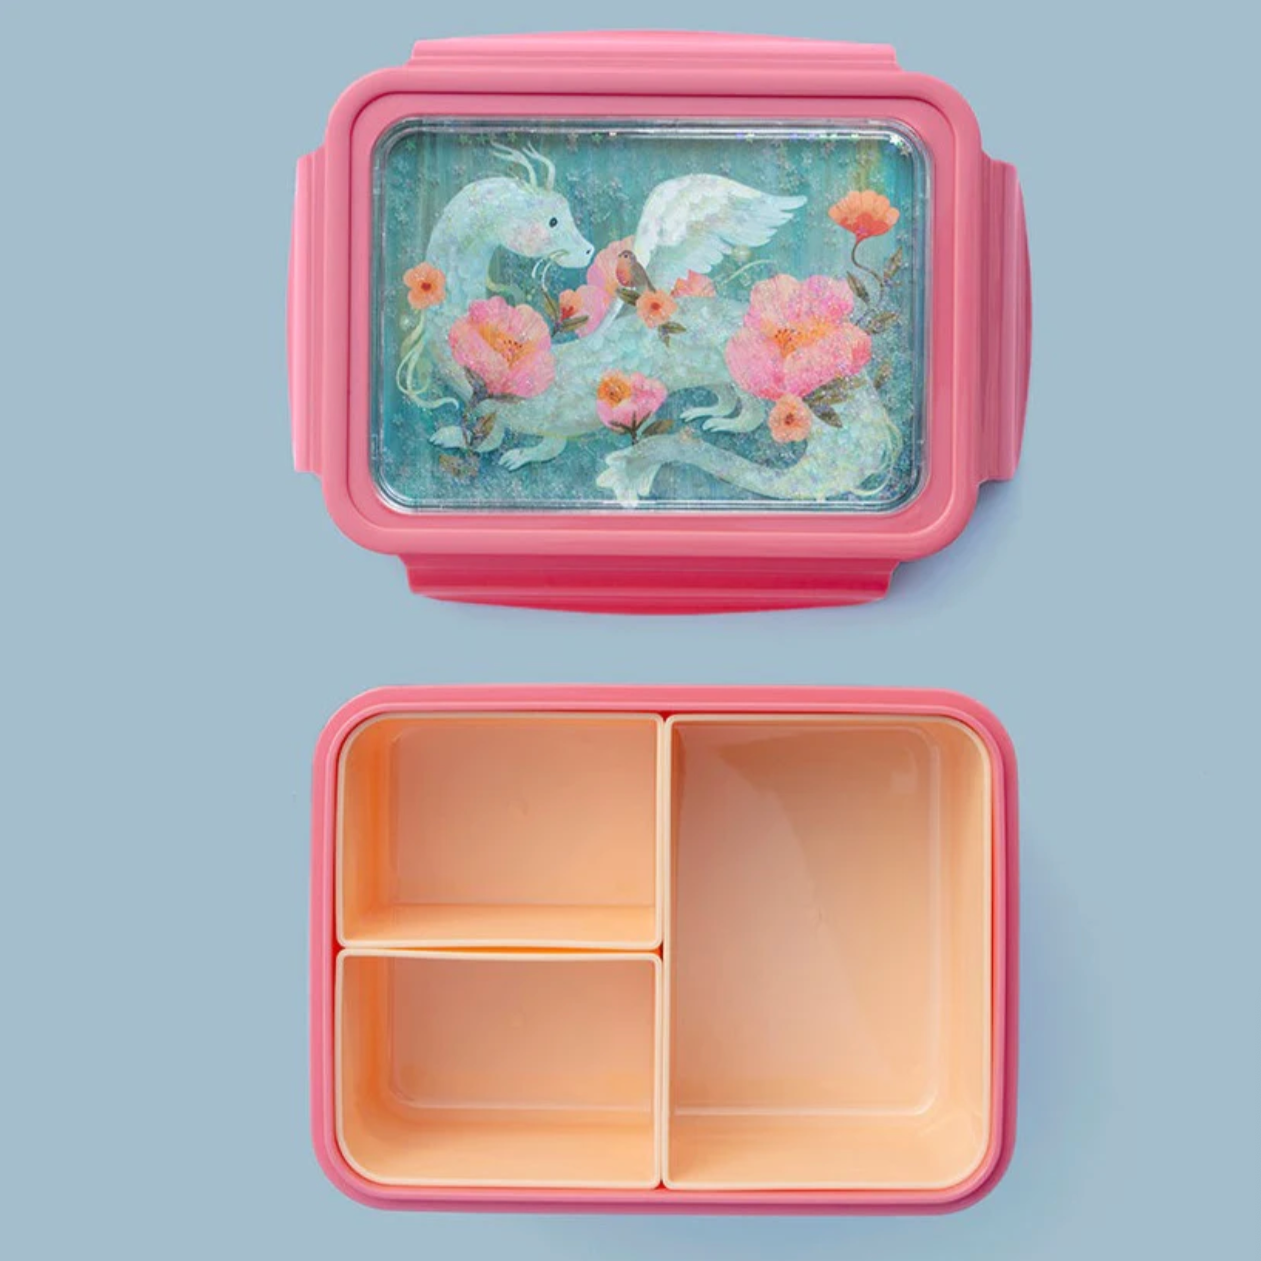 Lunchbox Bento Fairytale Dragon with pearl stars